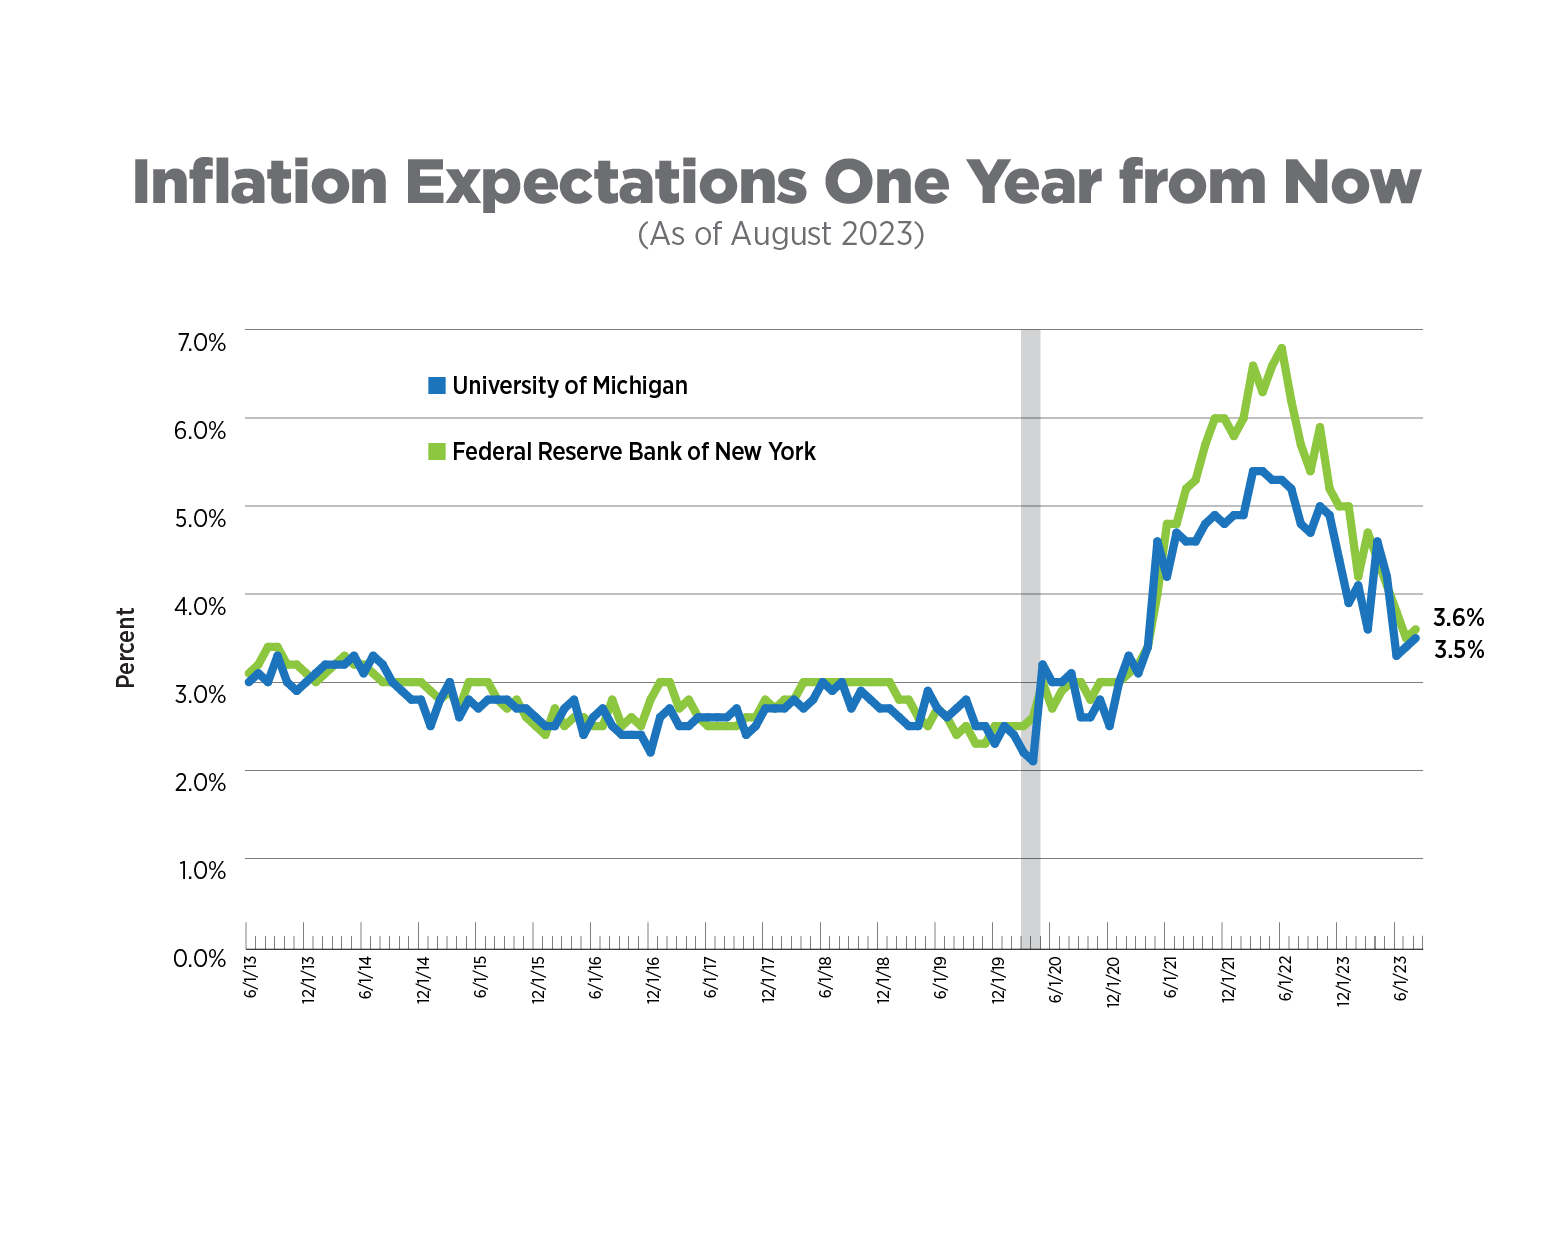 inflation expectations one year from now, as of august 2023